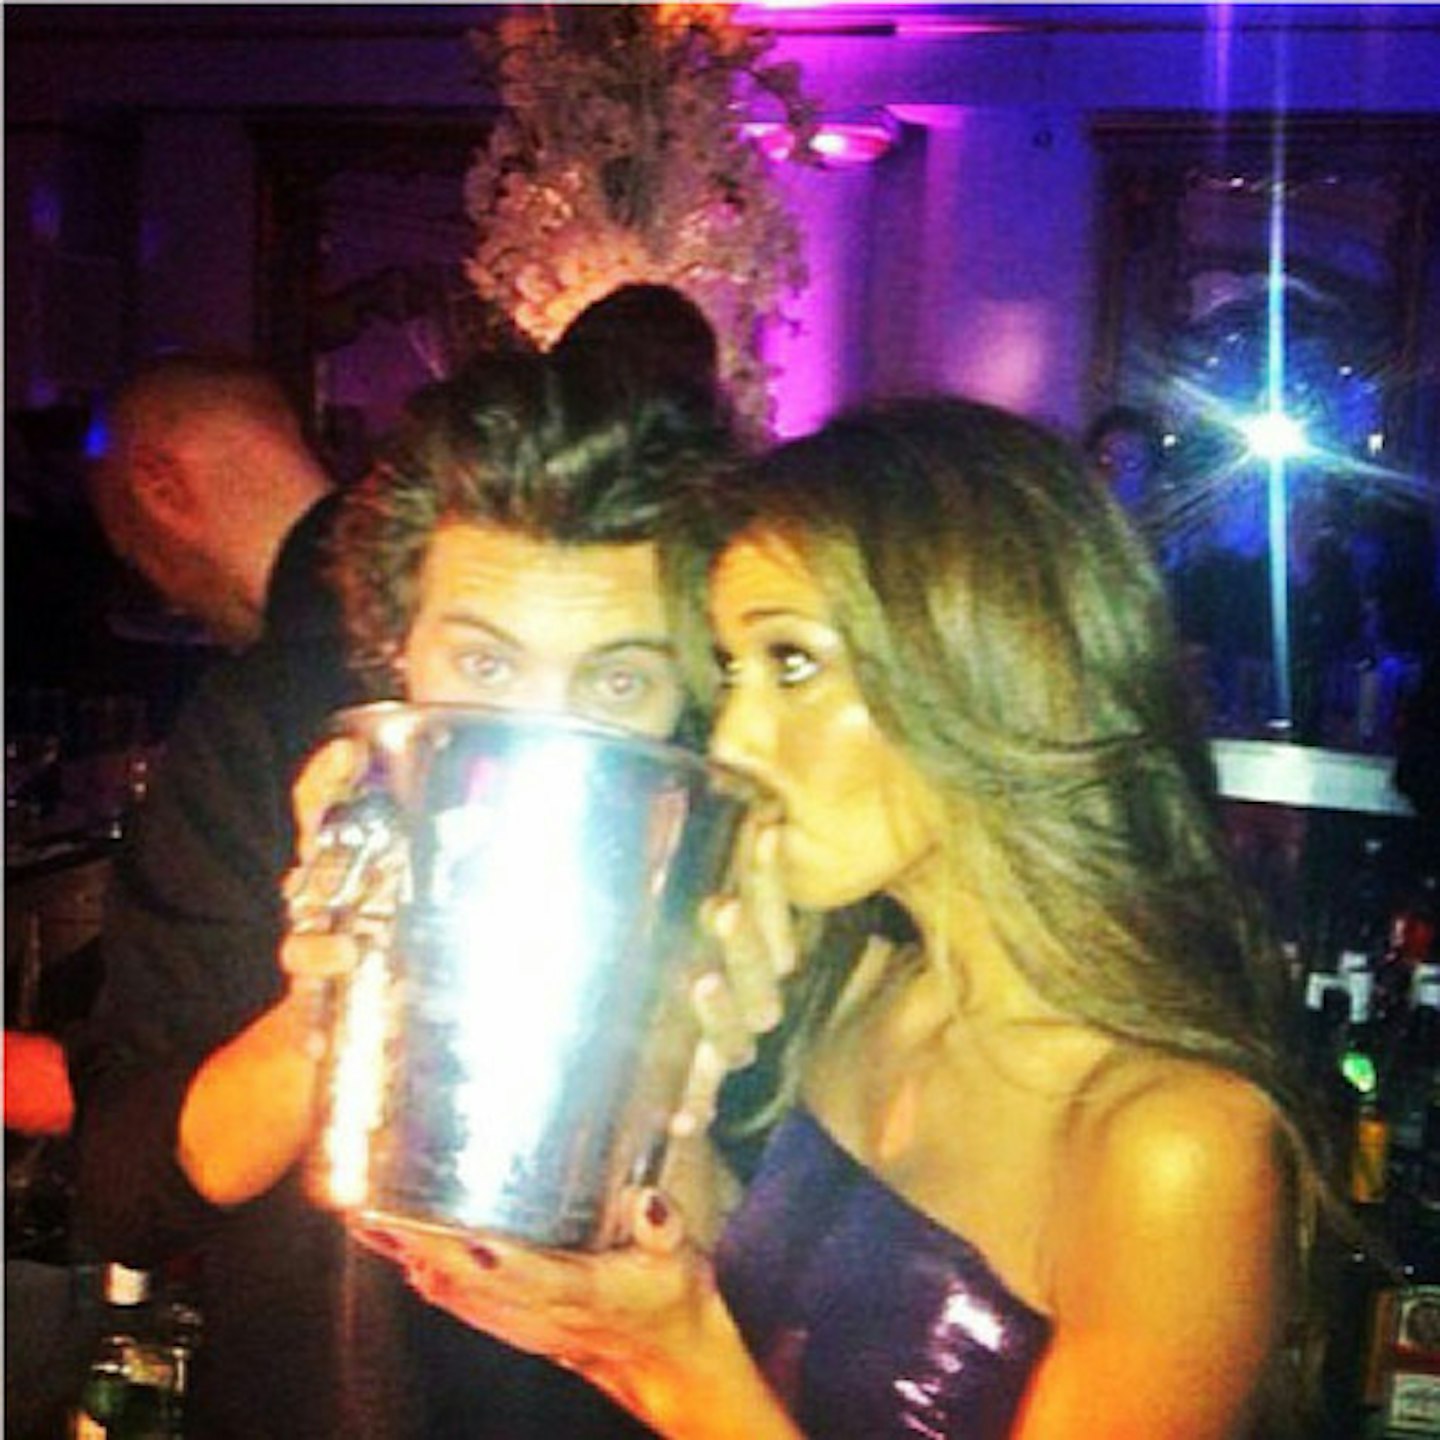 Harry and Nicole enjoy a night out together